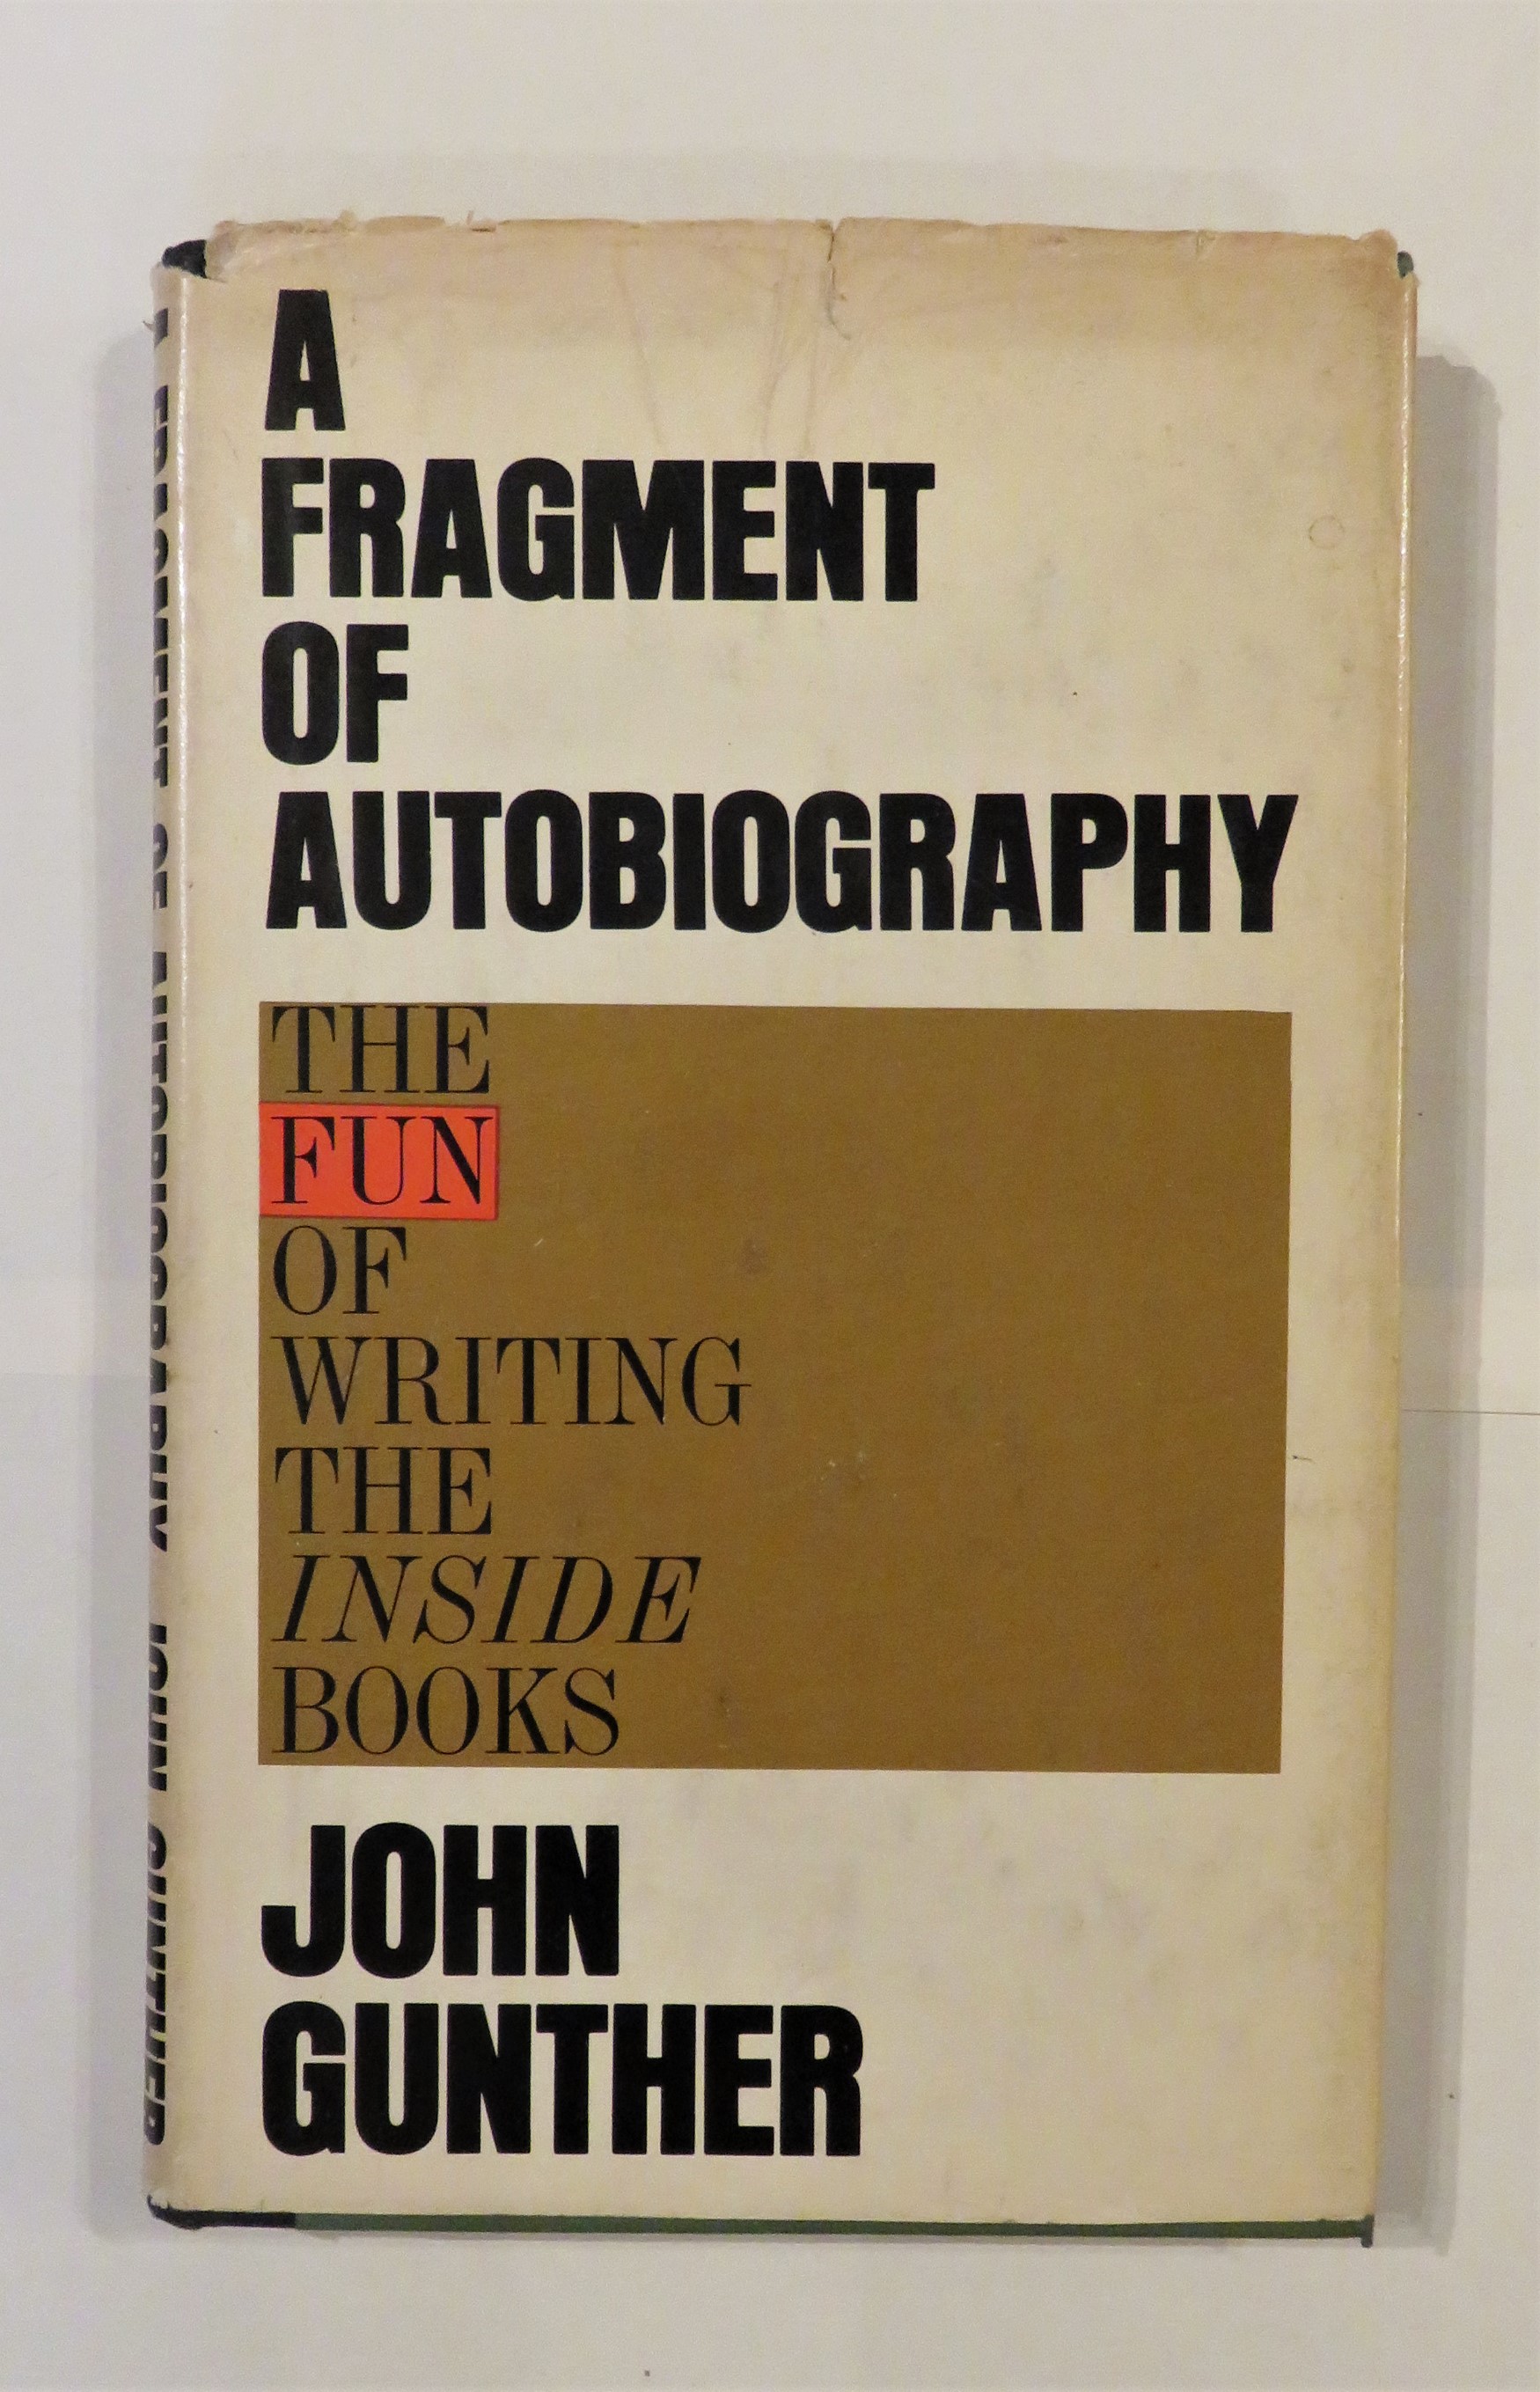 A Fragment of Autobiography: The Fun of Writing the Inside Books